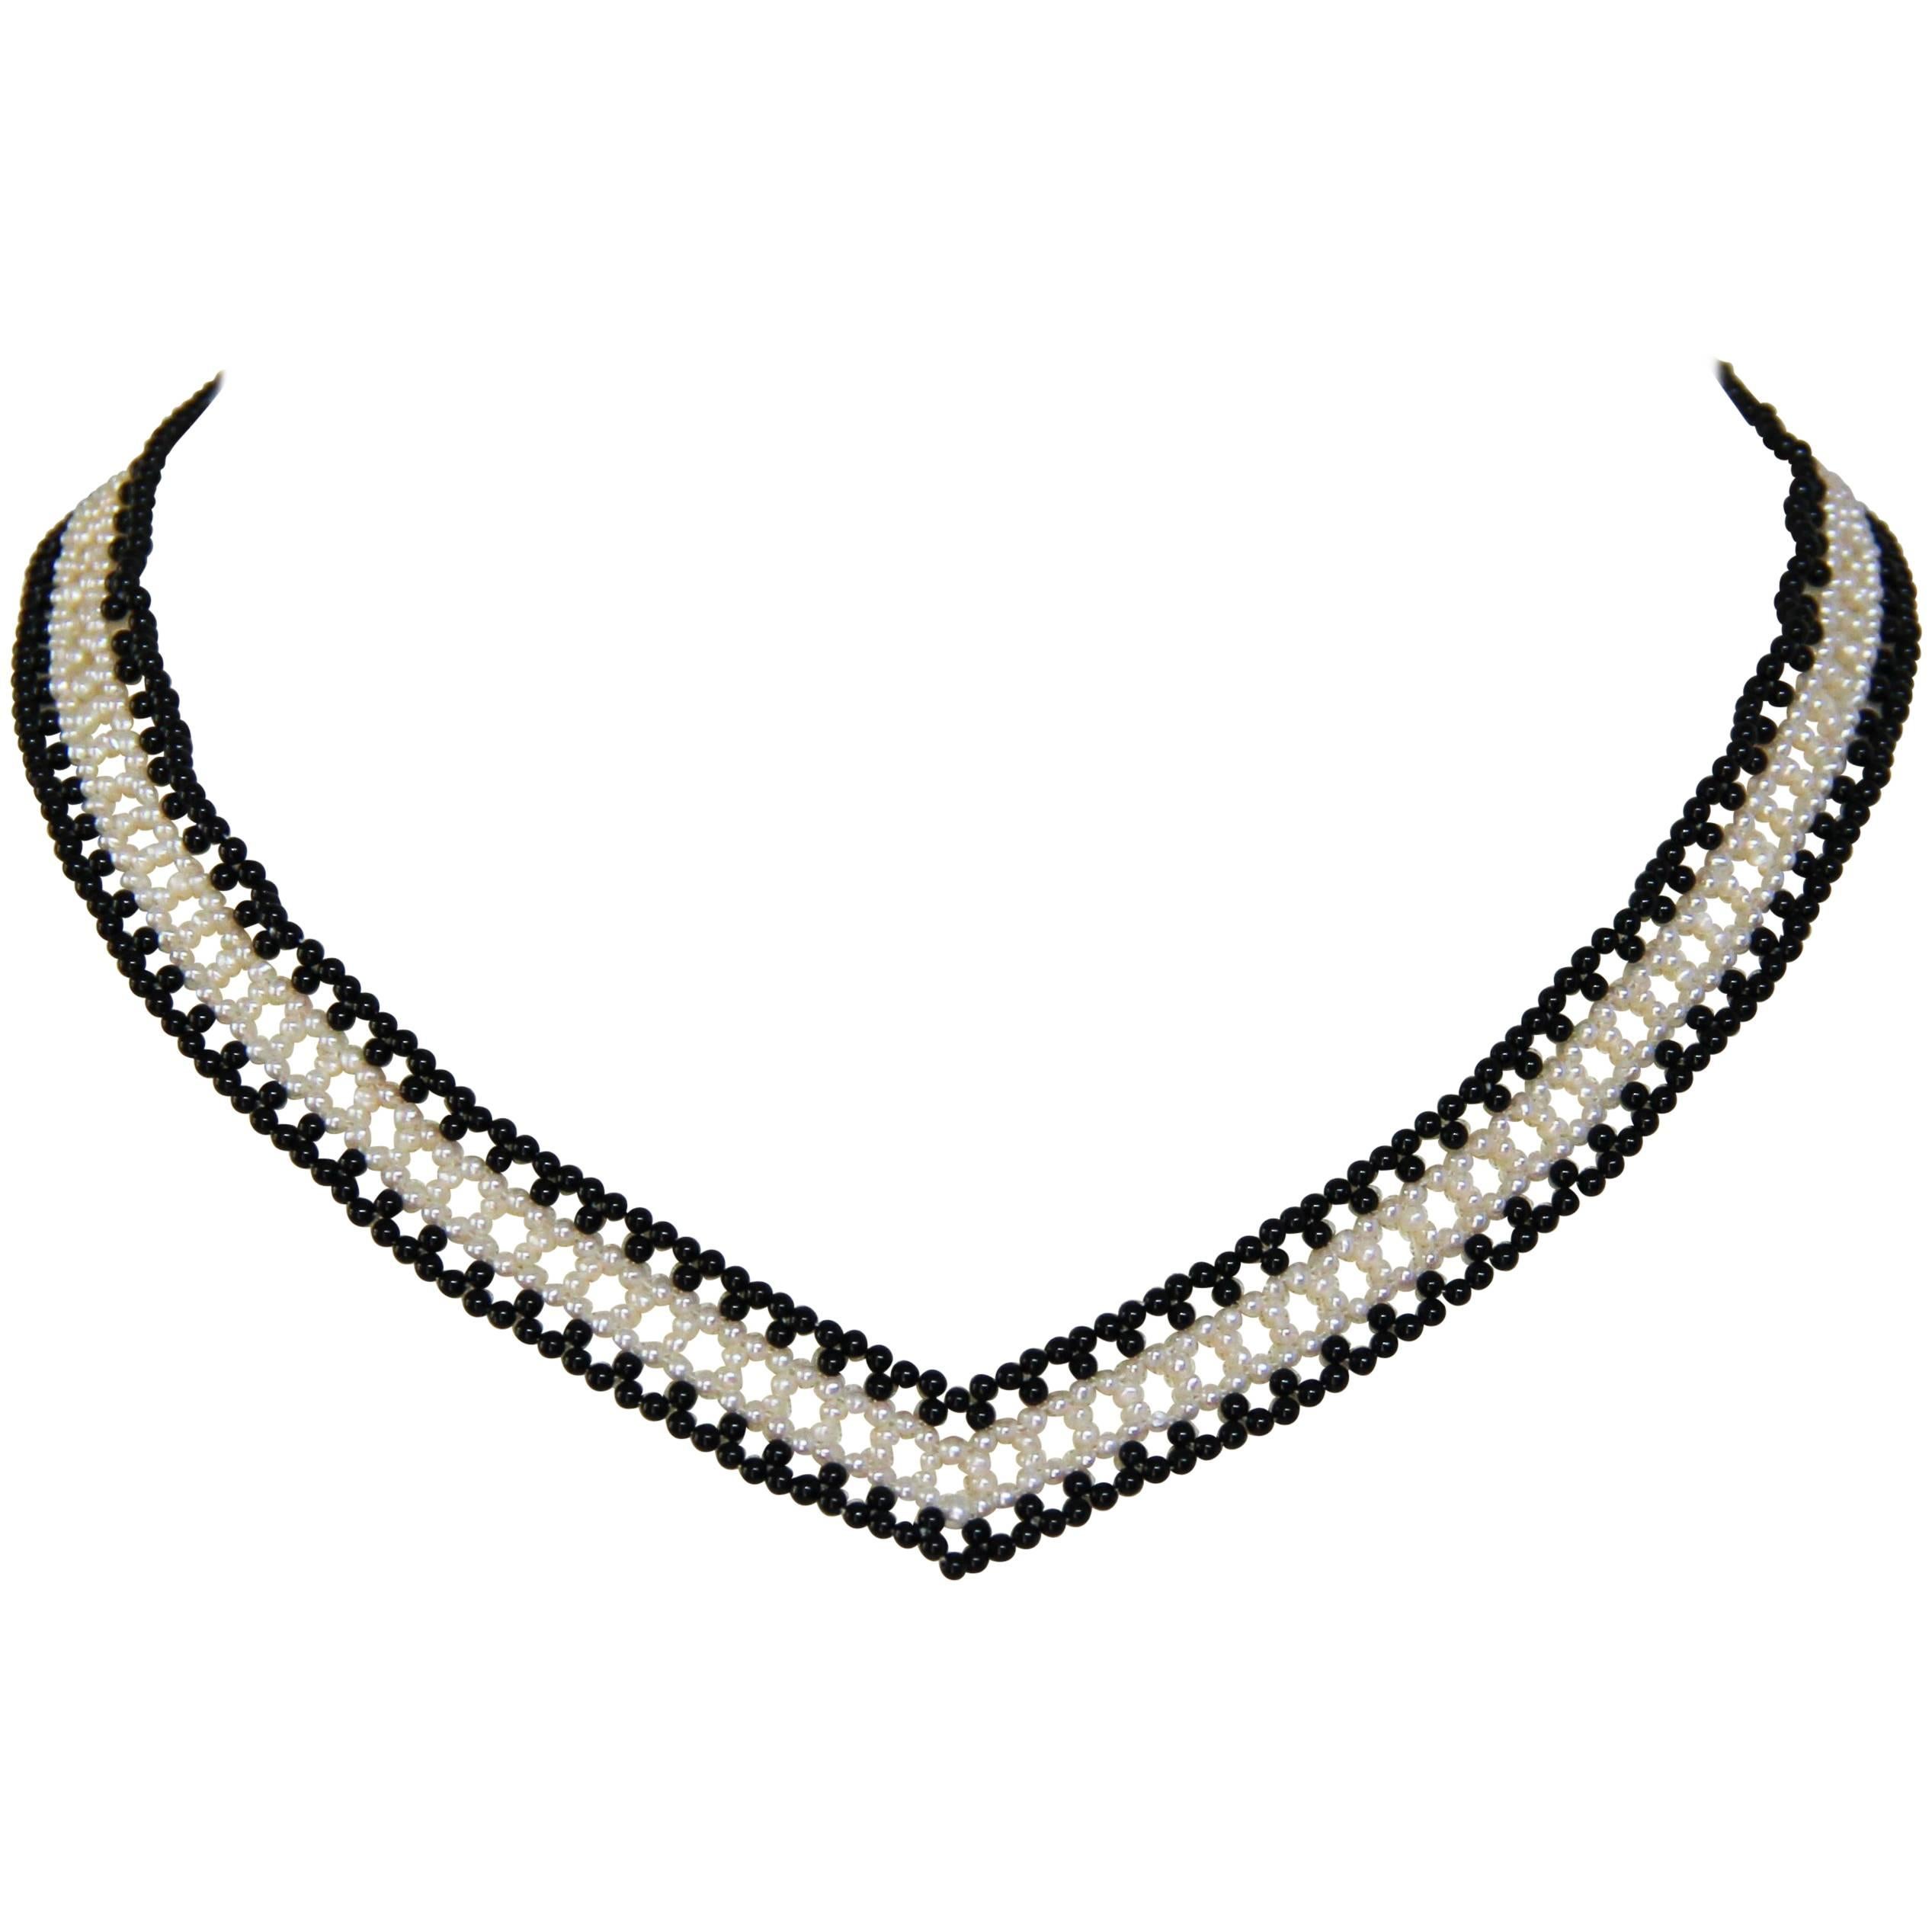 Marina J Black and White V Necklace with Pearls and Onyx Beads